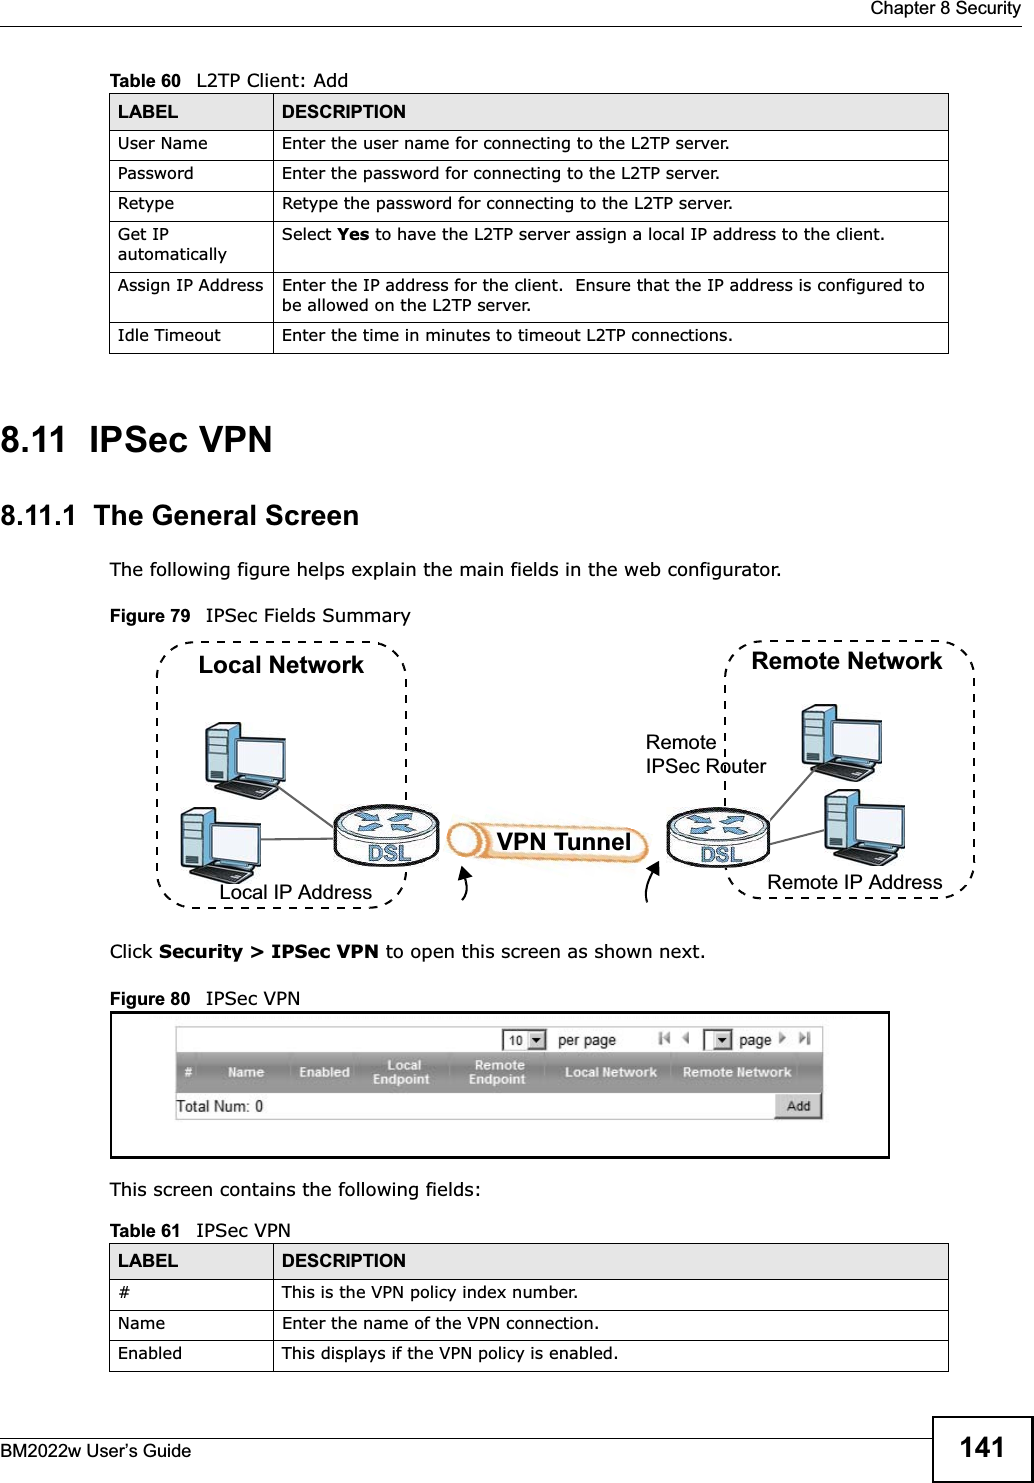  Chapter 8 SecurityBM2022w User’s Guide 1418.11  IPSec VPN8.11.1  The General ScreenThe following figure helps explain the main fields in the web configurator.Figure 79   IPSec Fields SummaryClick Security &gt; IPSec VPN to open this screen as shown next.Figure 80   IPSec VPNThis screen contains the following fields:User Name Enter the user name for connecting to the L2TP server.Password Enter the password for connecting to the L2TP server.Retype Retype the password for connecting to the L2TP server.Get IP automaticallySelect Yes to have the L2TP server assign a local IP address to the client.Assign IP Address Enter the IP address for the client.  Ensure that the IP address is configured to be allowed on the L2TP server.Idle Timeout Enter the time in minutes to timeout L2TP connections.Table 60   L2TP Client: AddLABEL DESCRIPTIONTable 61   IPSec VPNLABEL DESCRIPTION# This is the VPN policy index number. Name Enter the name of the VPN connection.Enabled This displays if the VPN policy is enabled.Local NetworkLocal IP AddressRemote NetworkRemote IP AddressRemote IPSec RouterVPN Tunnel